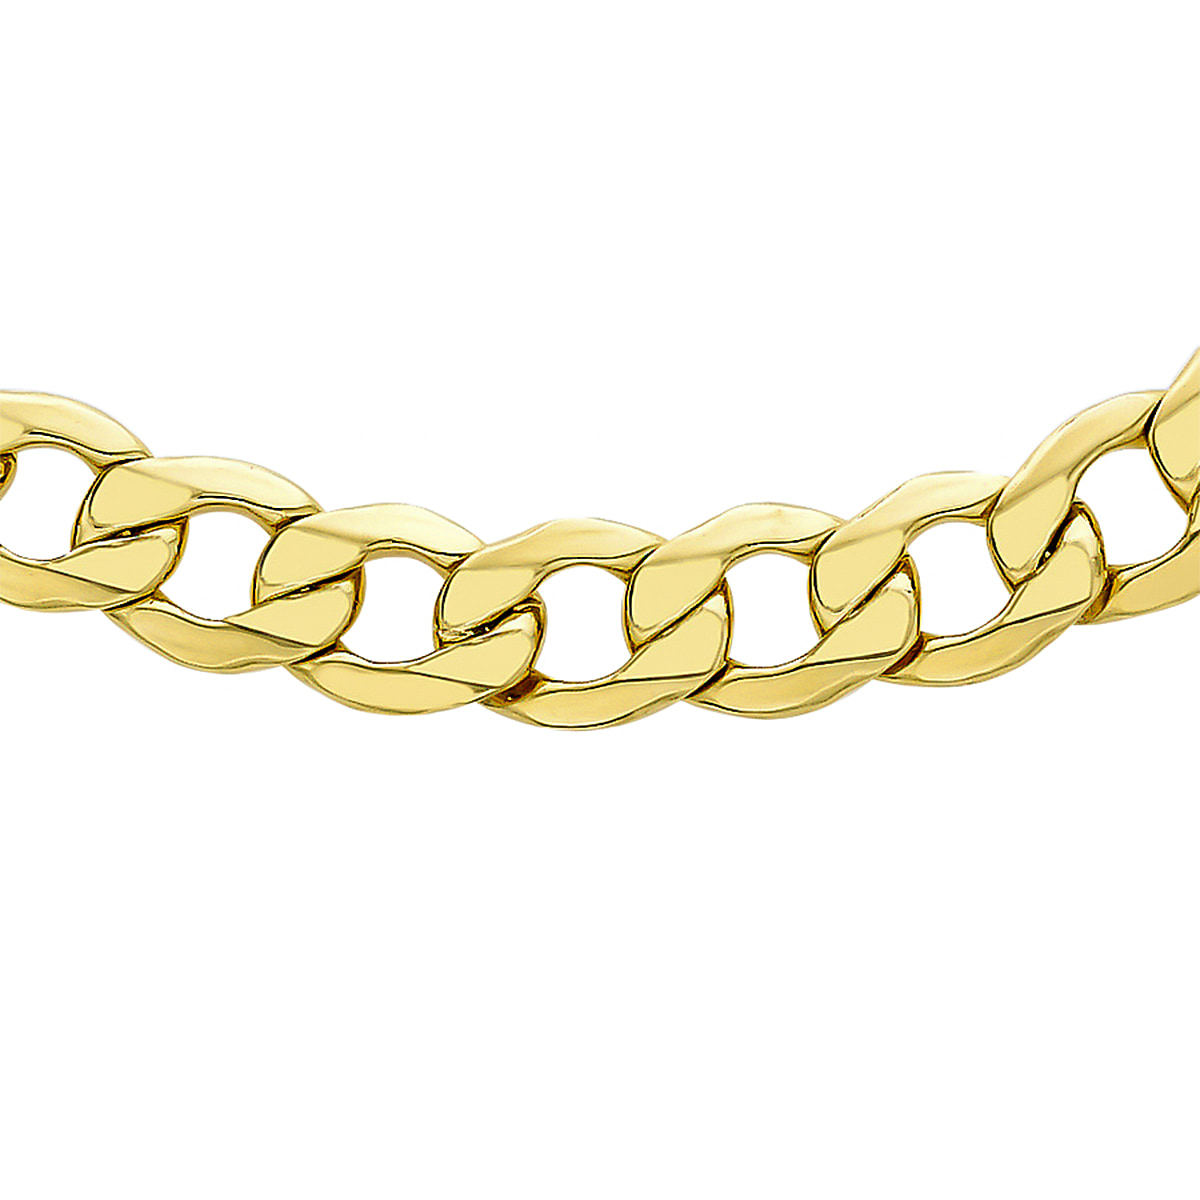 Hatton Garden Closeout - 9K Yellow Gold Curb Necklace (Size - 24 Inch), Gold Wt. 18.4 Gms